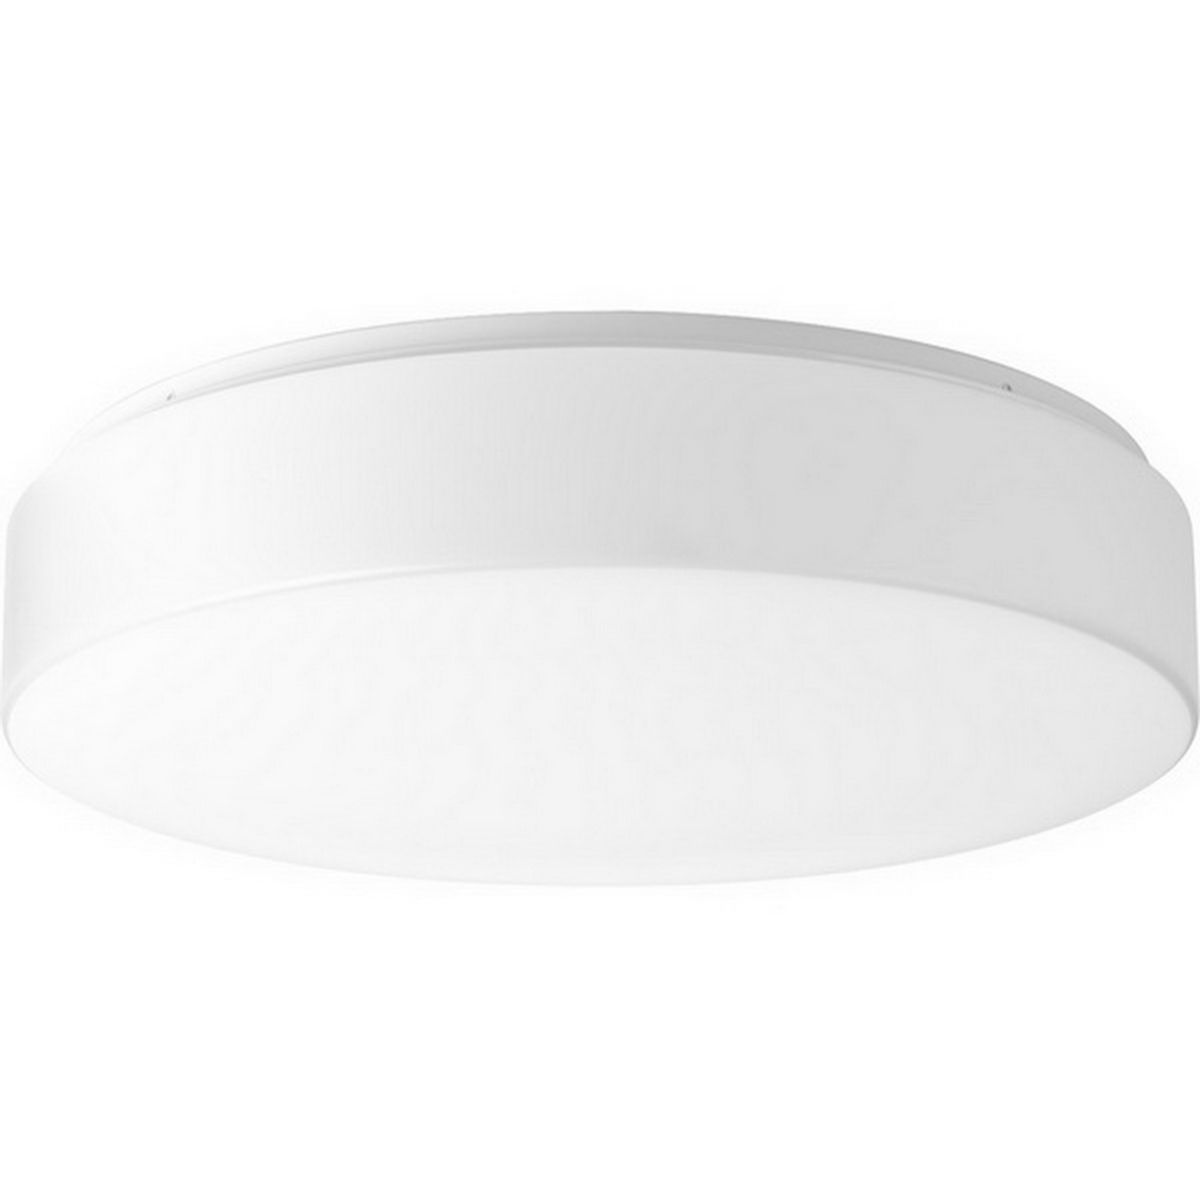 Drums and Clouds 17 in LED Flush Mount Light White finish